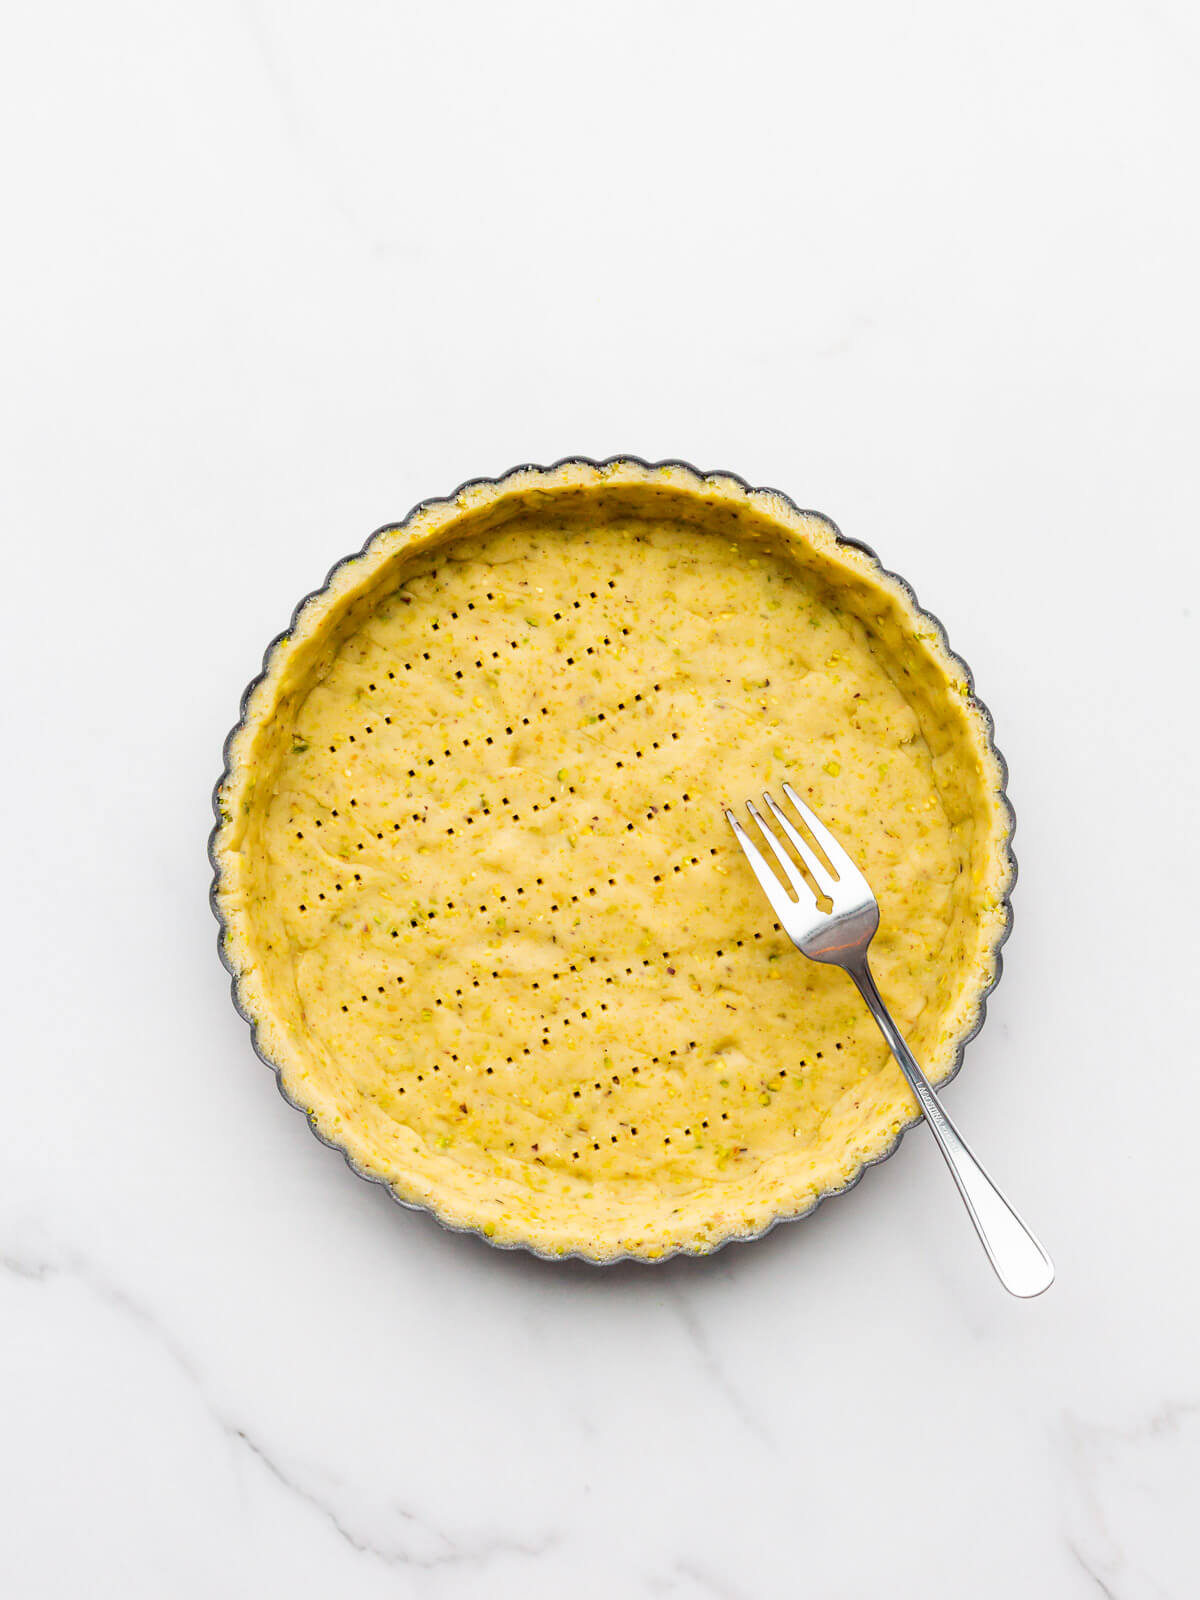 Poking holes with a fork into an unbaked tart shell to release steam as it bakes in the oven.